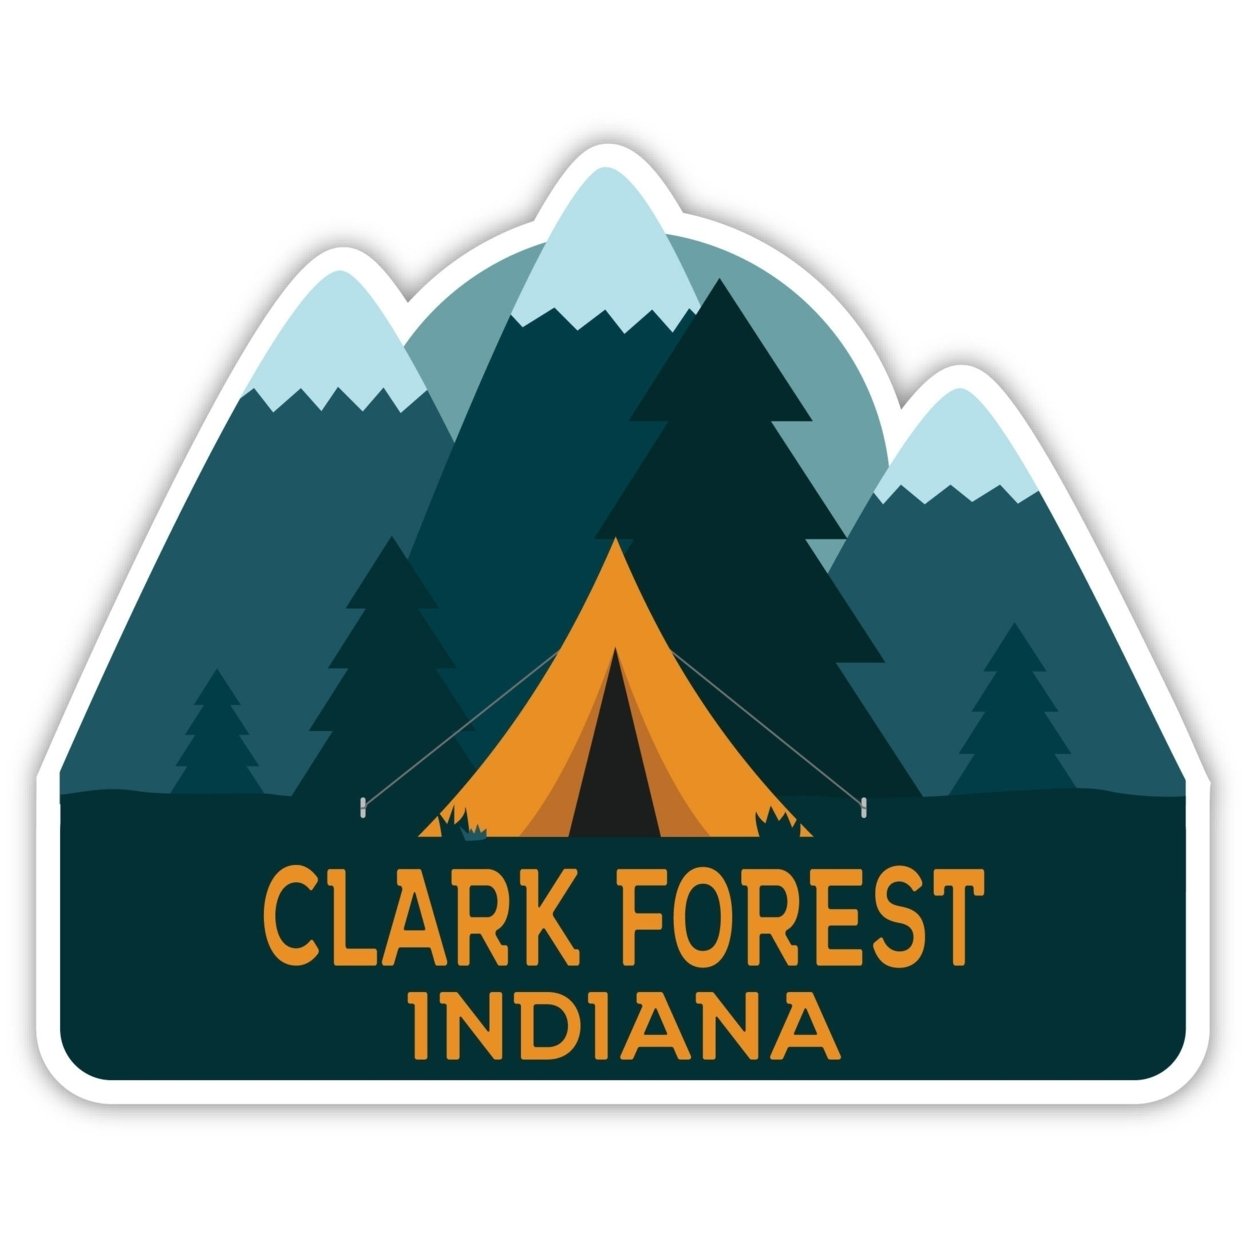 Clark Forest Indiana Souvenir Decorative Stickers (Choose Theme And Size) - Single Unit, 8-Inch, Tent